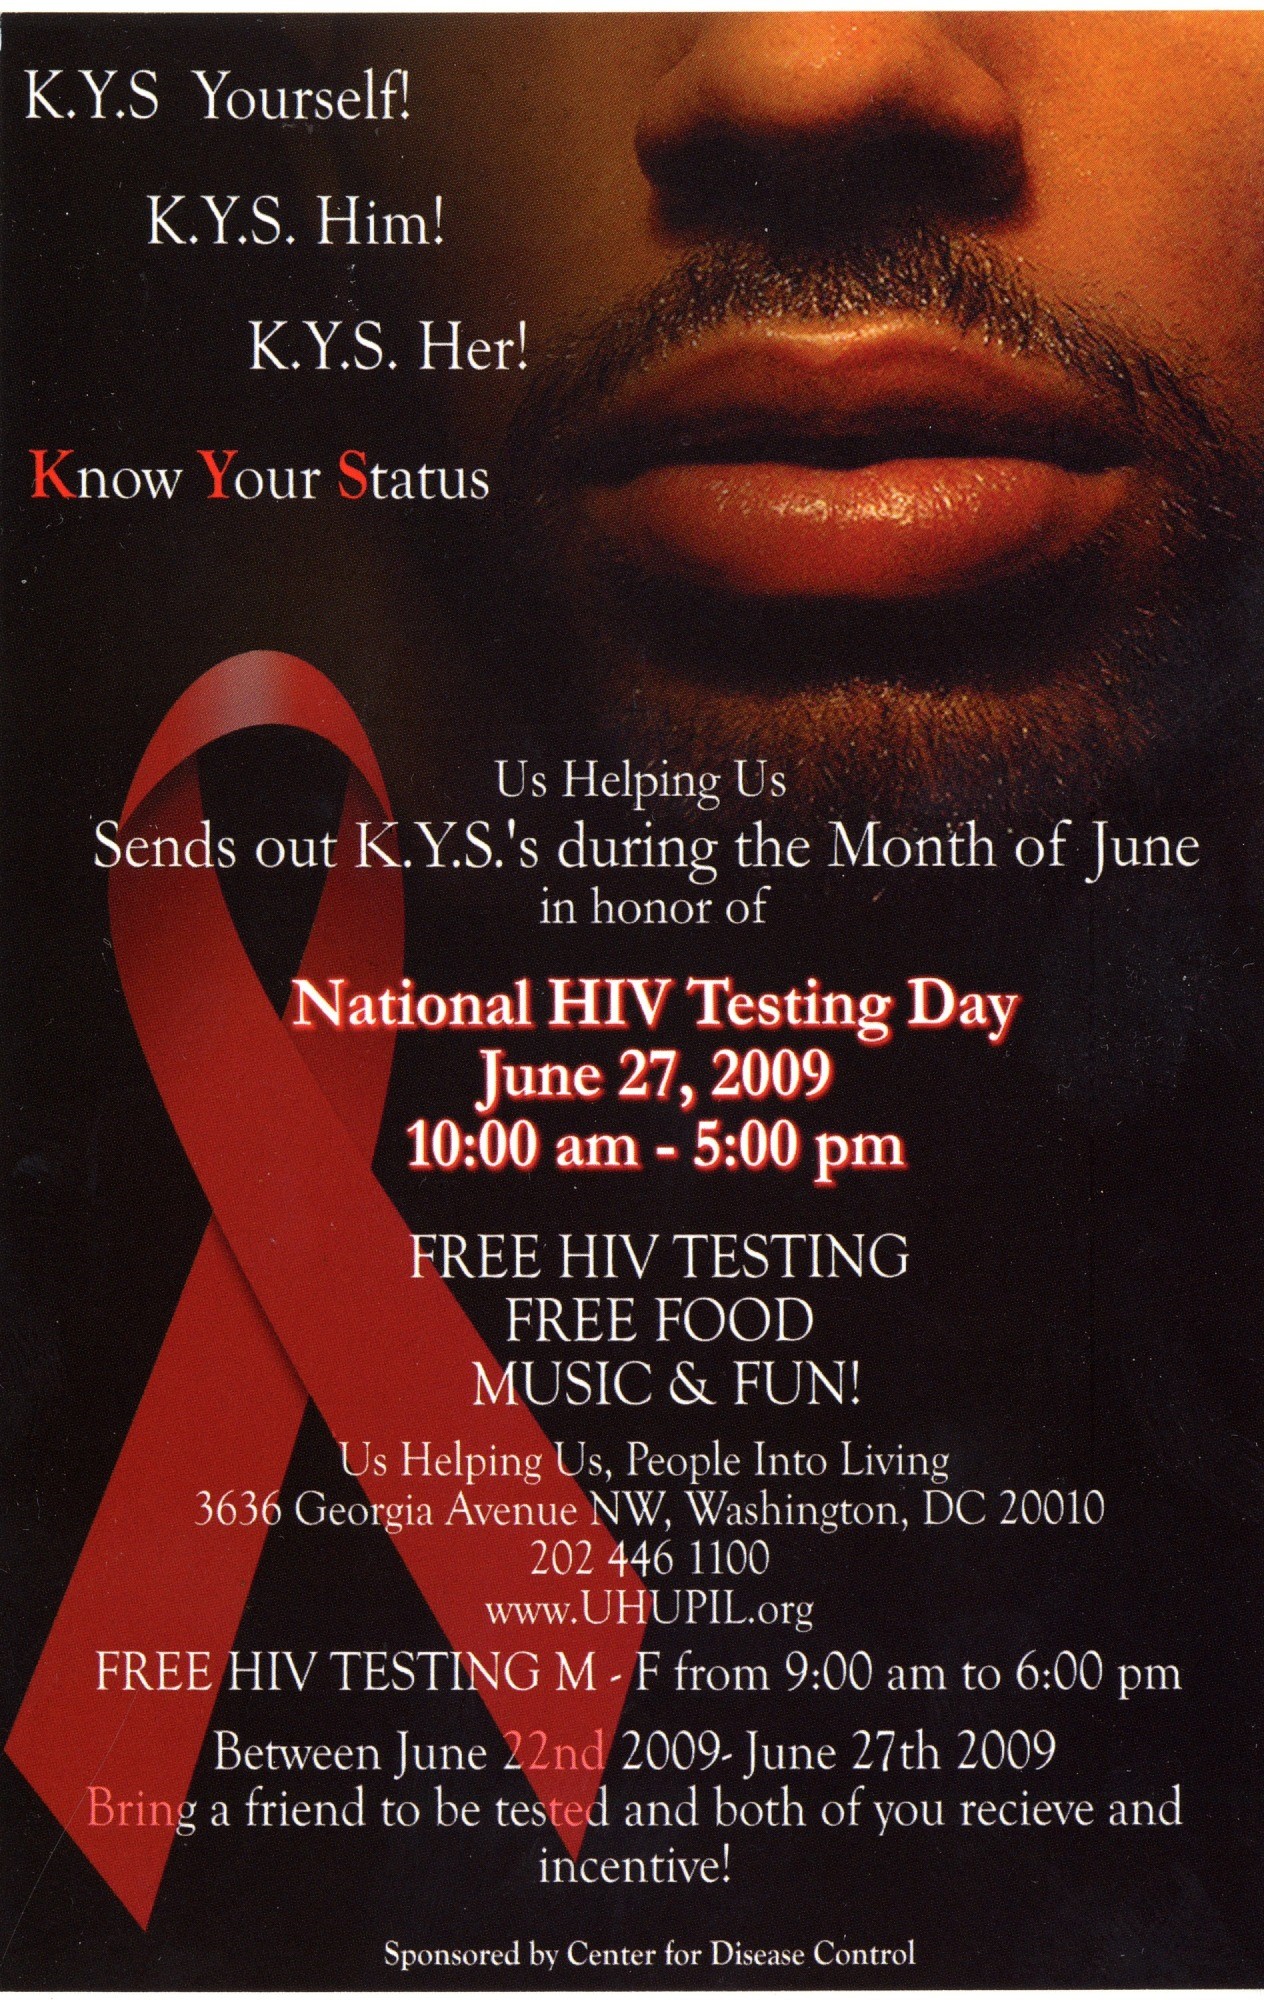 National HIV Testing Day, June 27, 2009